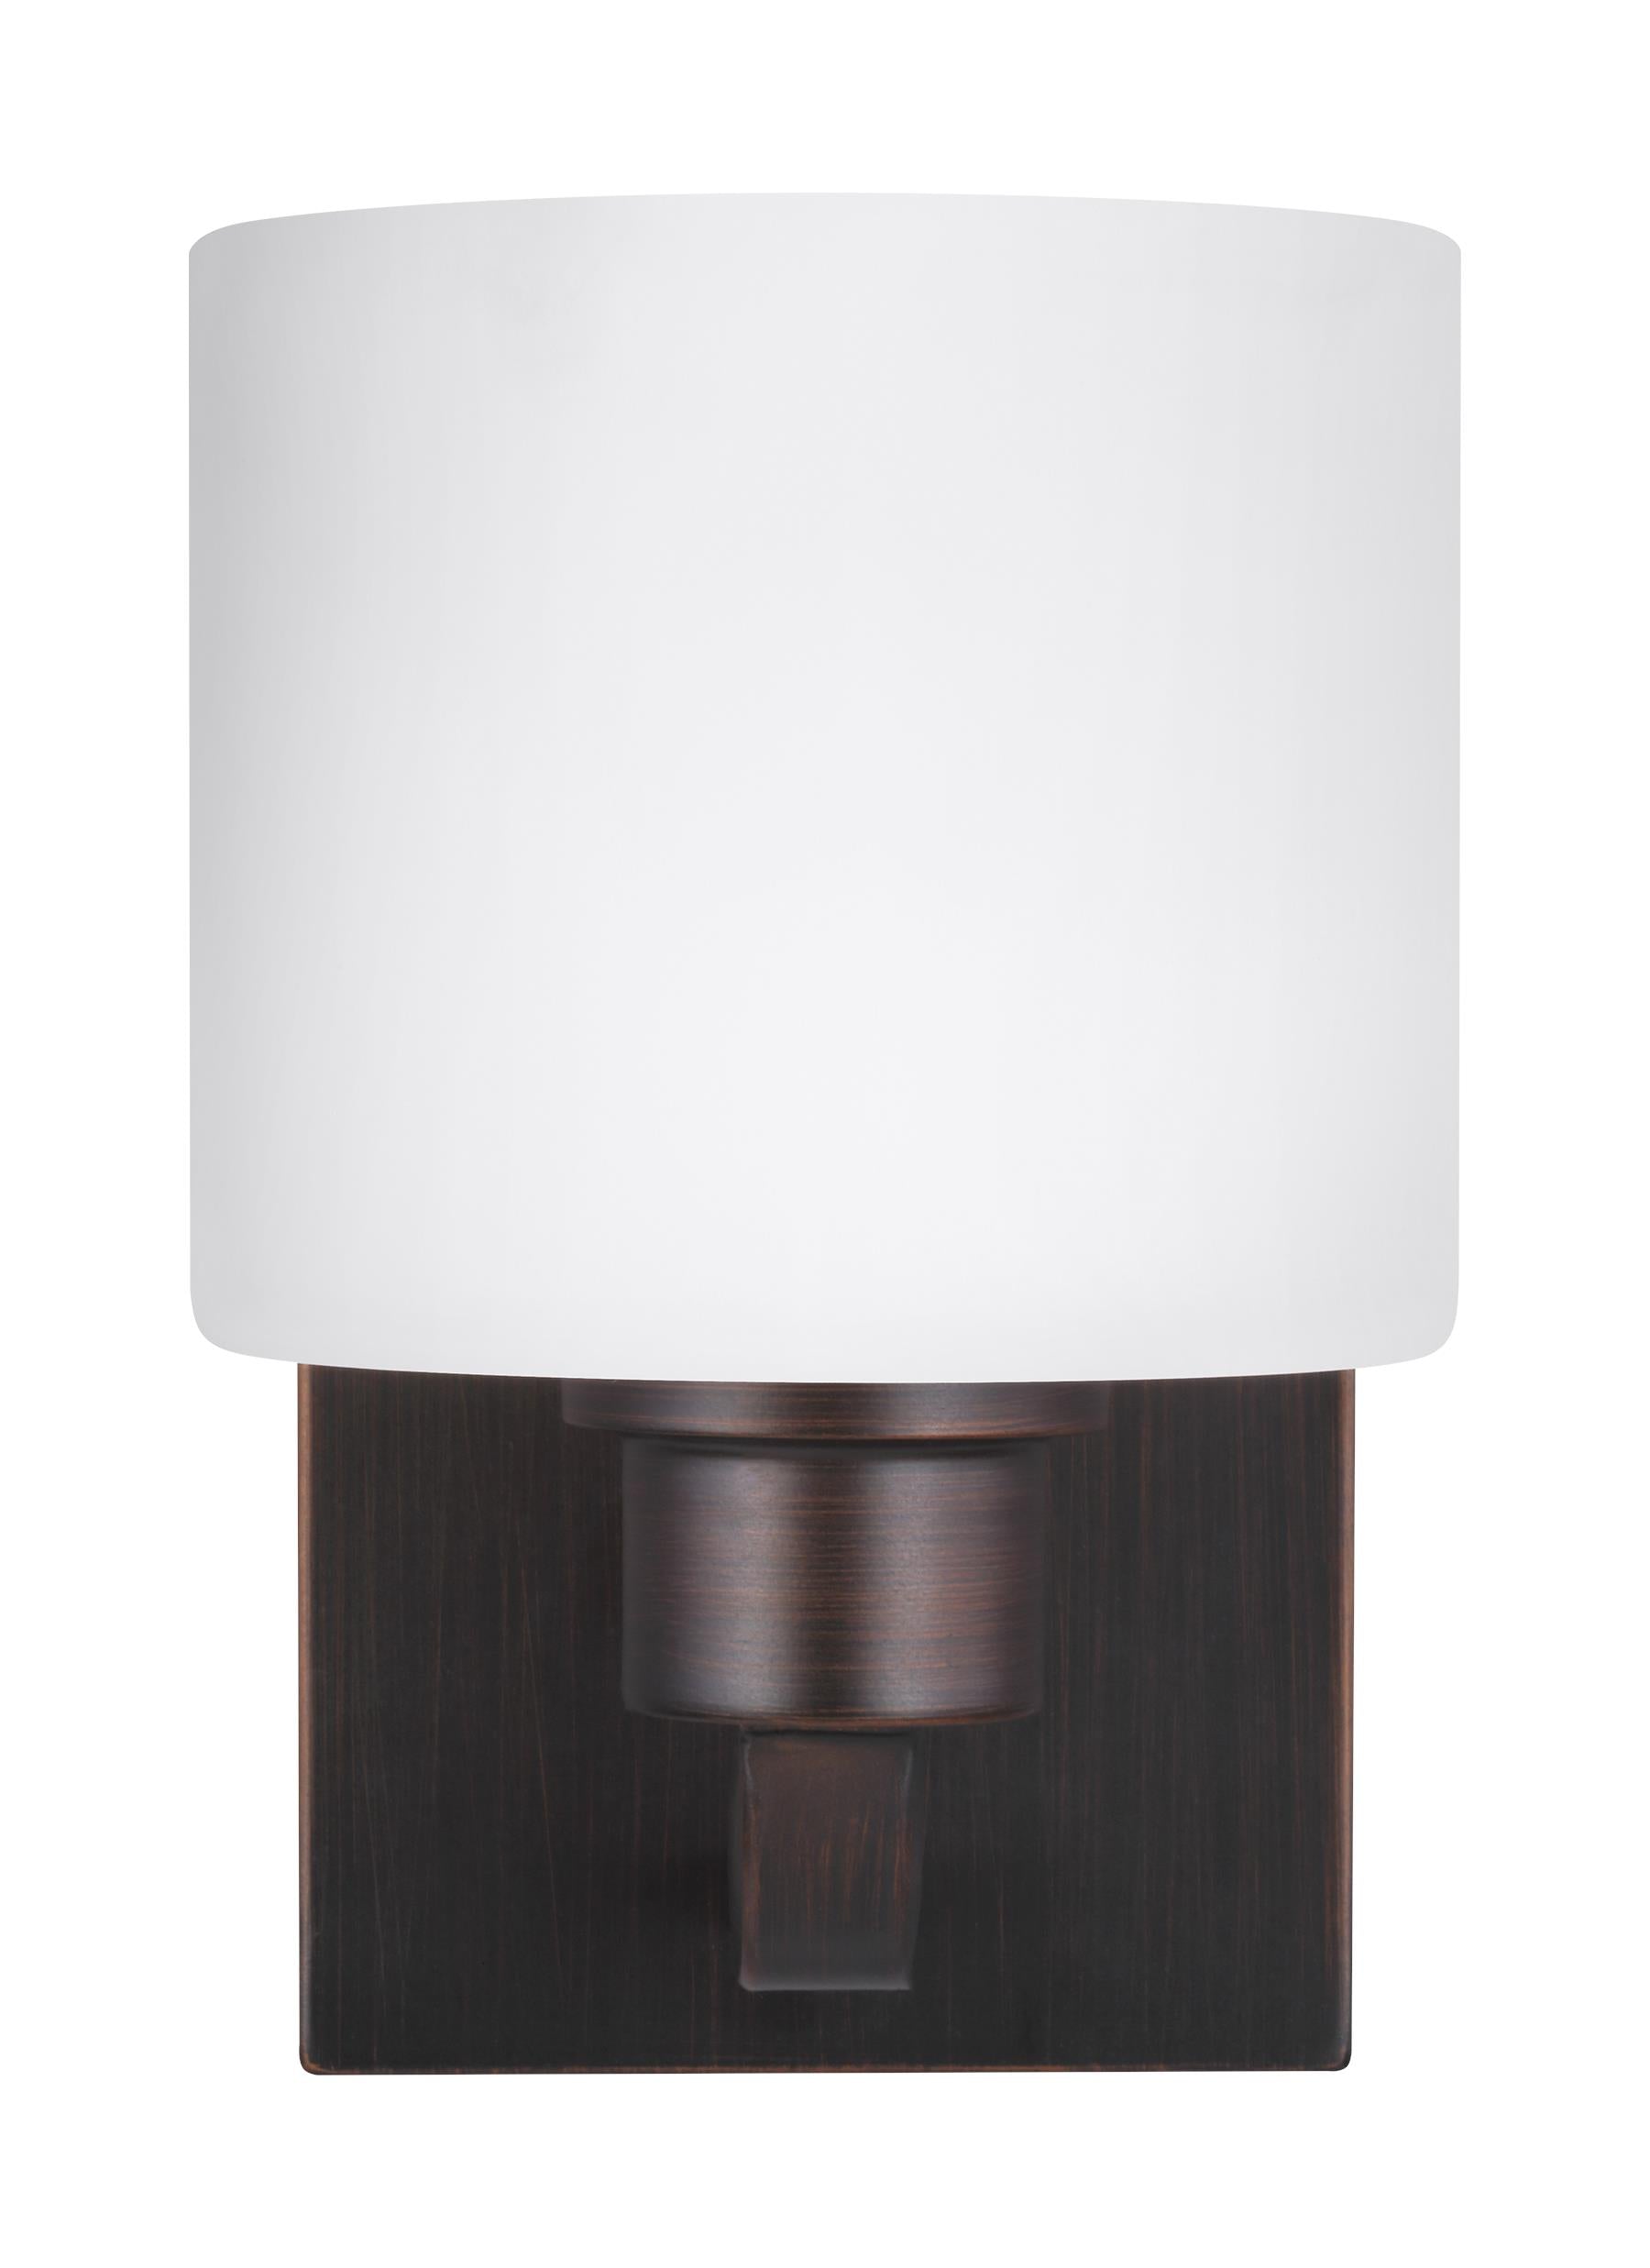 Canfield modern 1-light indoor dimmable bath vanity wall sconce in bronze finish with etched white inside glass shade